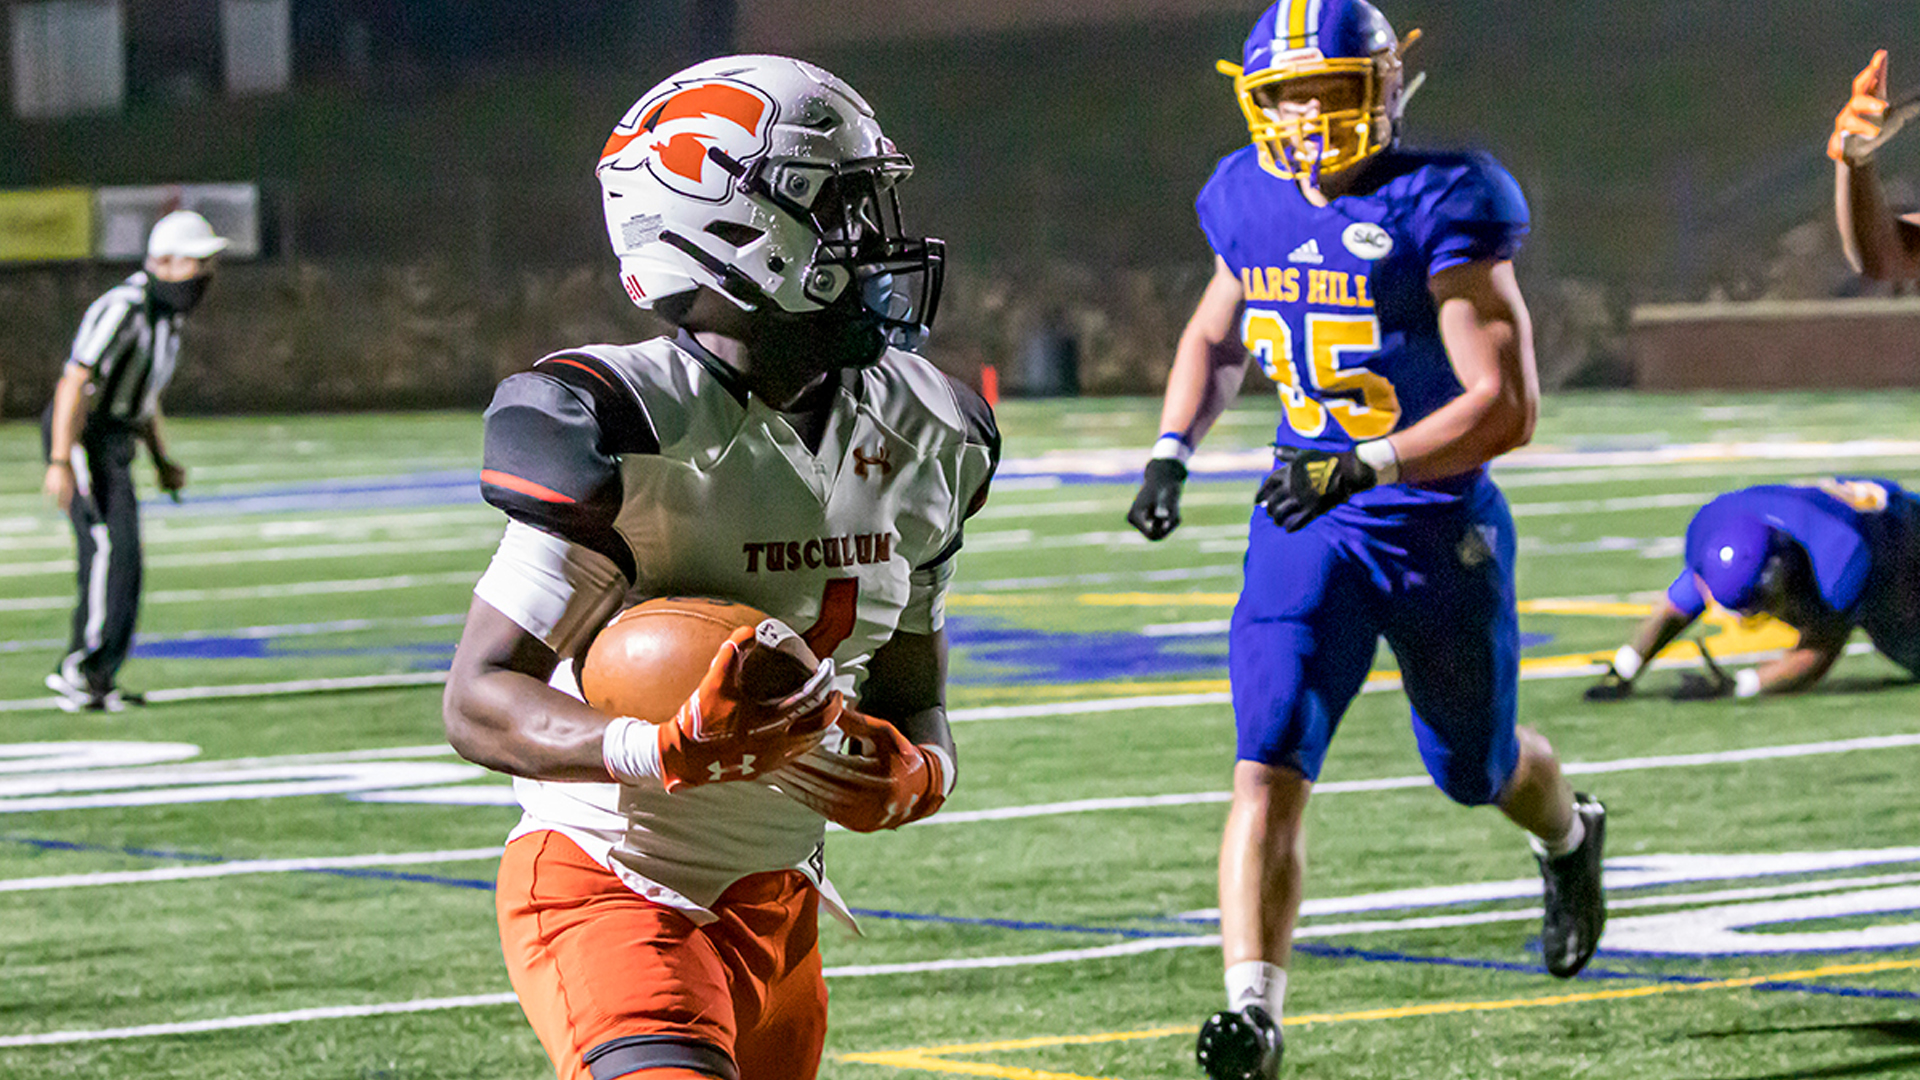 TJ Jones scored three touchdowns in Tusculum's 58-20 road win at Mars Hill (photo by Chuck Williams)